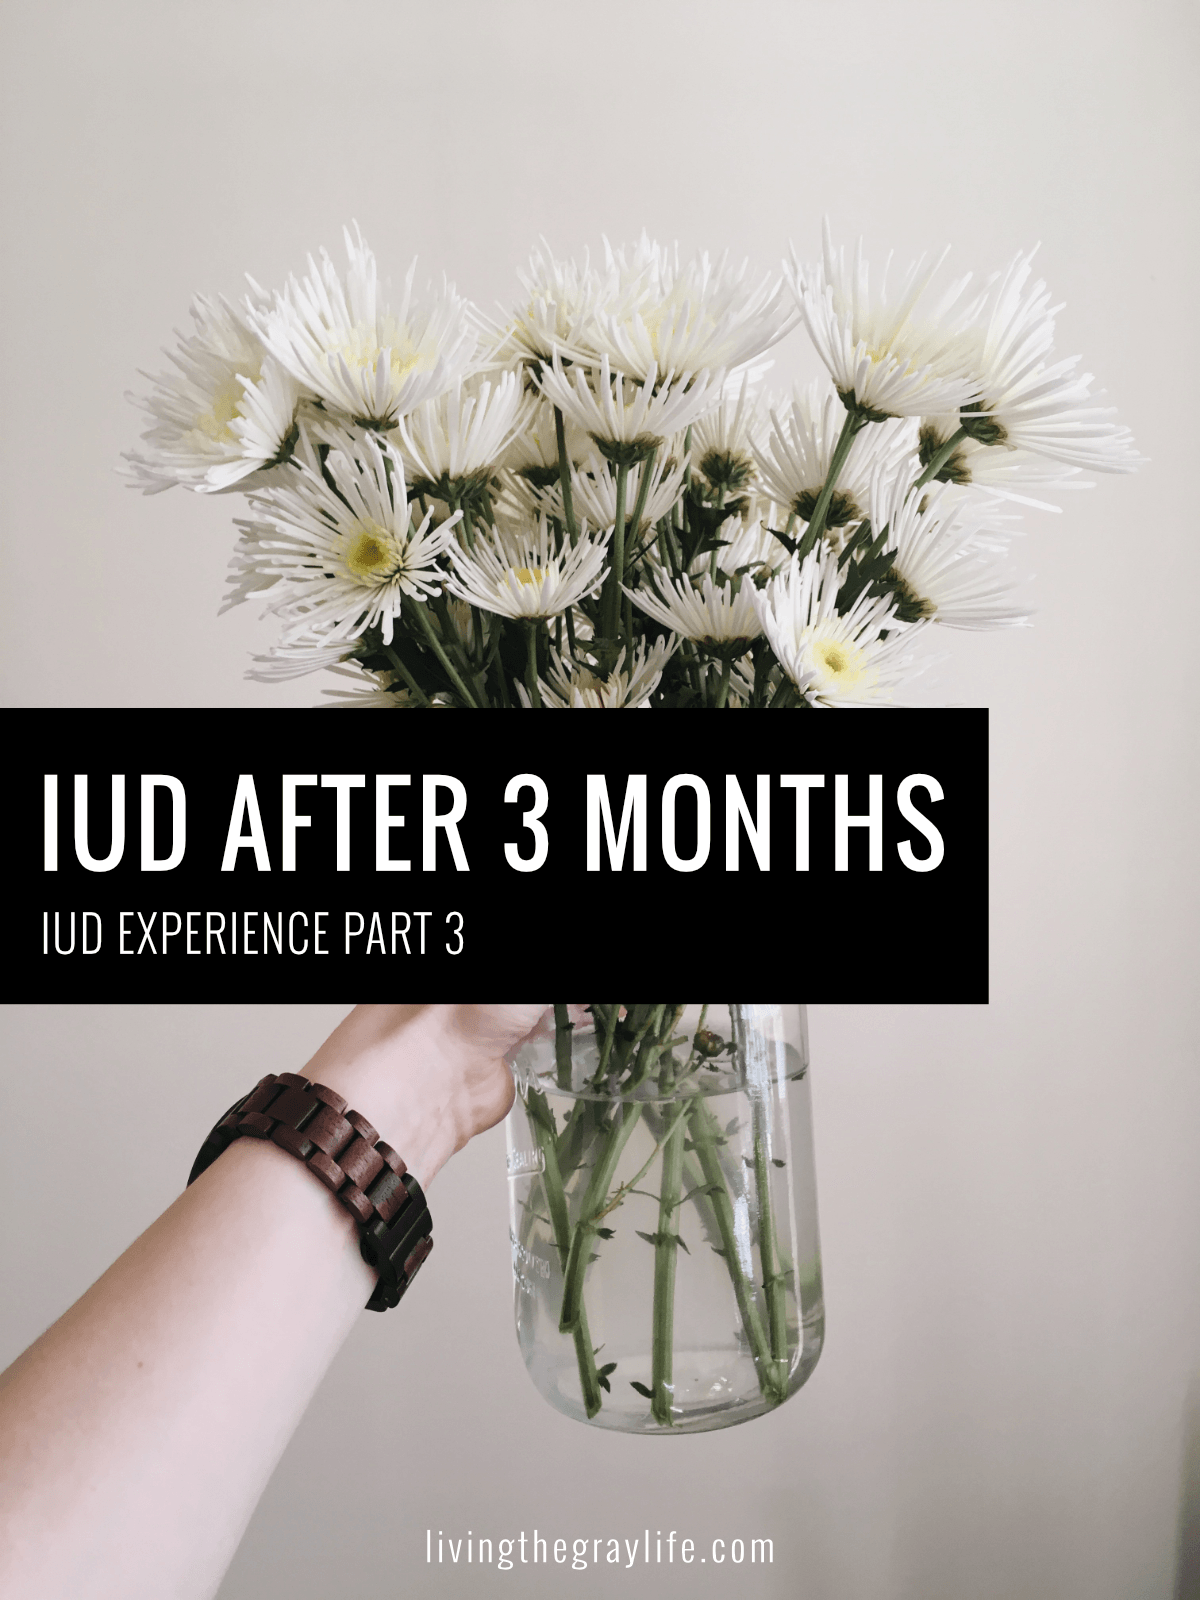 Iud Experience Part 3 Blog Cover